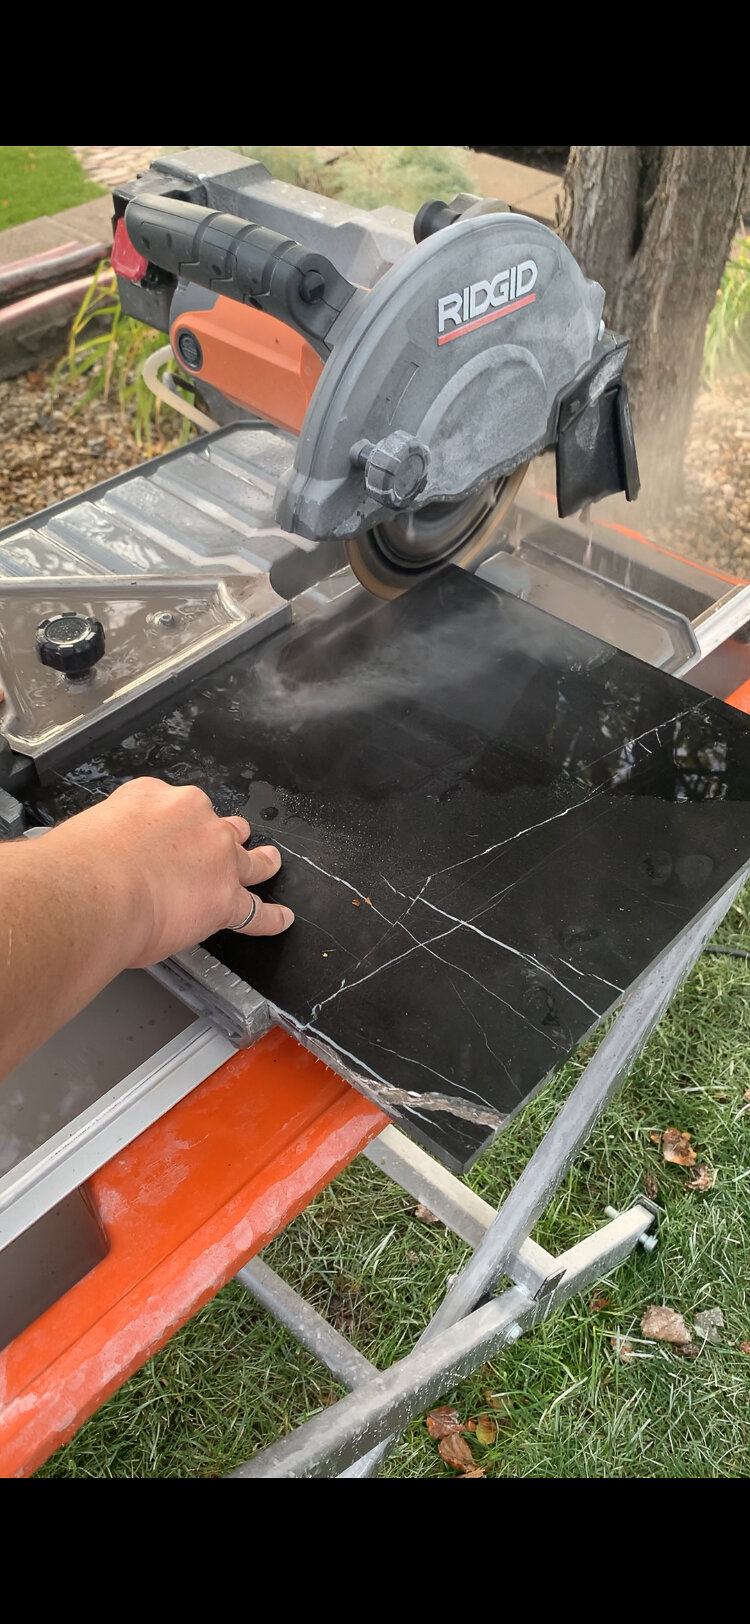 Cutting black marble tile into 1" strips on wet tile saw